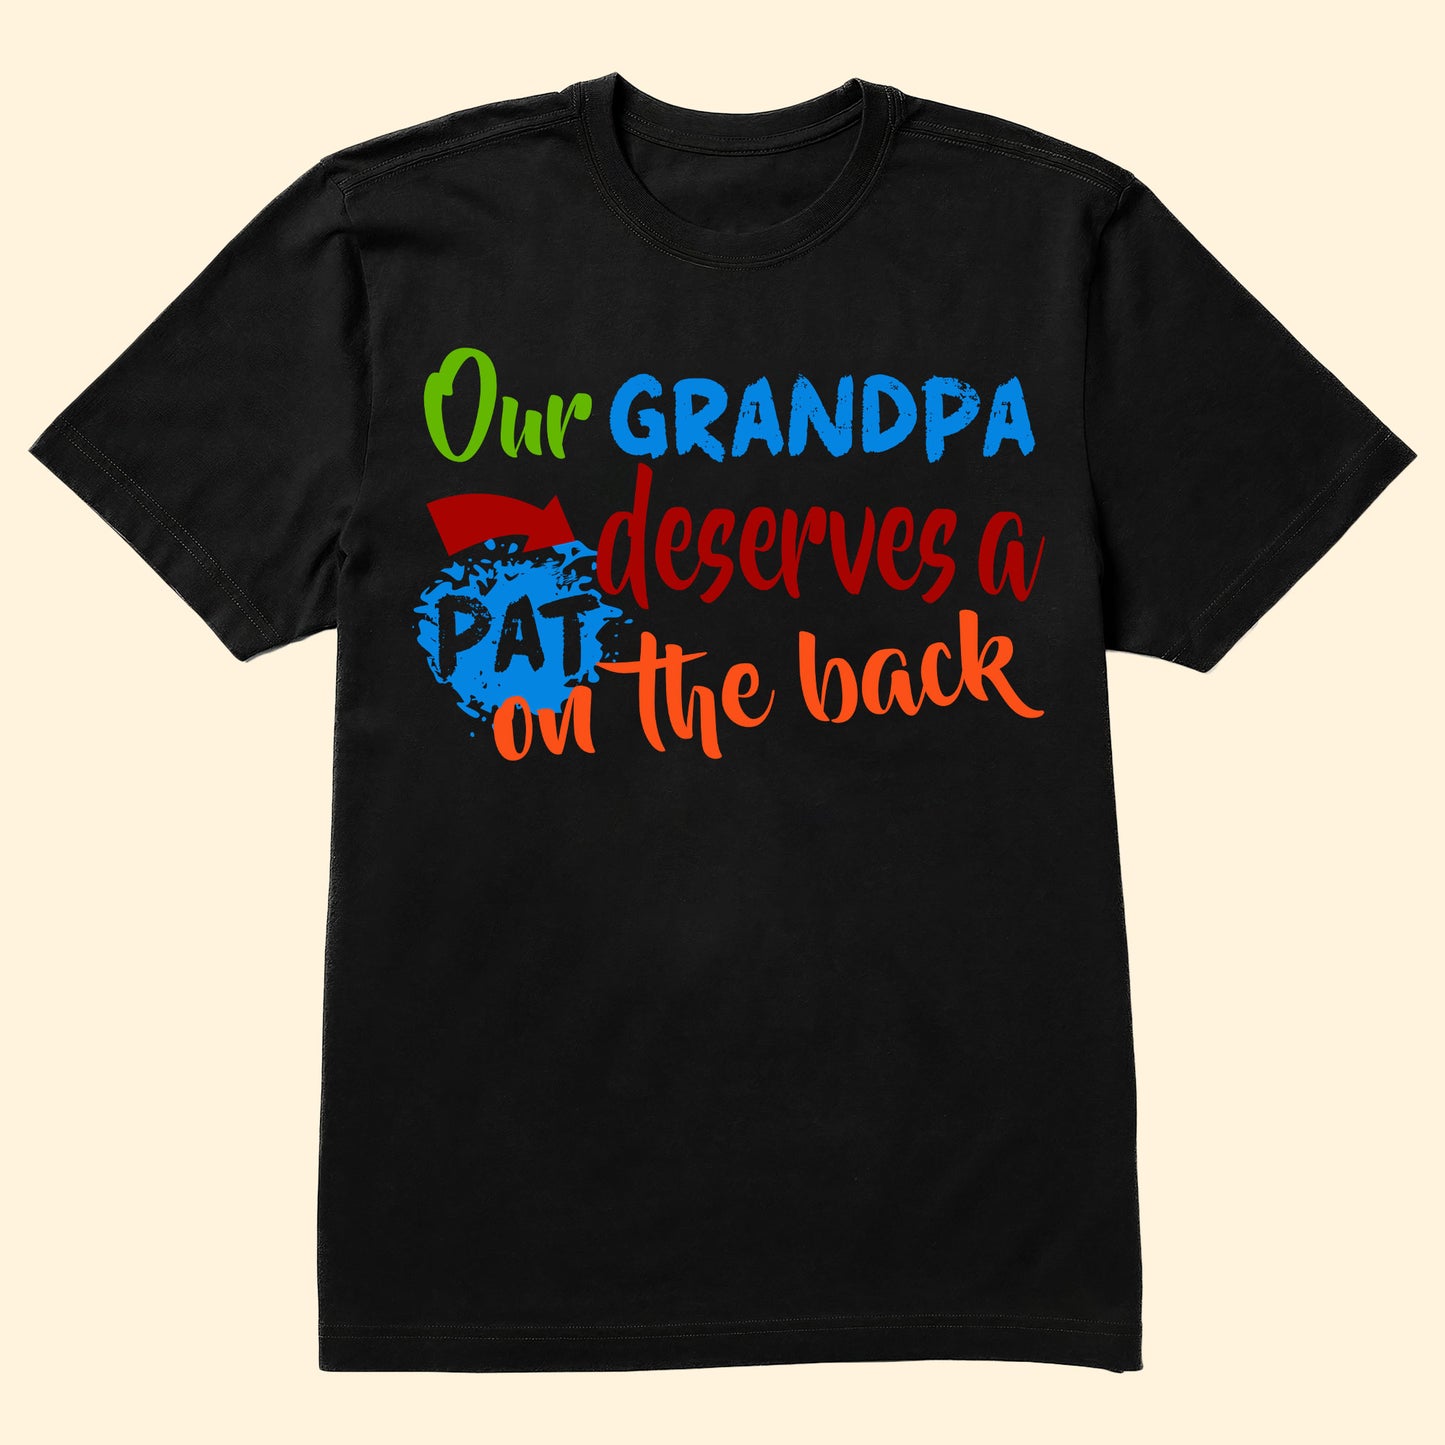 Dad/ Grandpa Deserves A Pat On The Back - Personalized Shirt